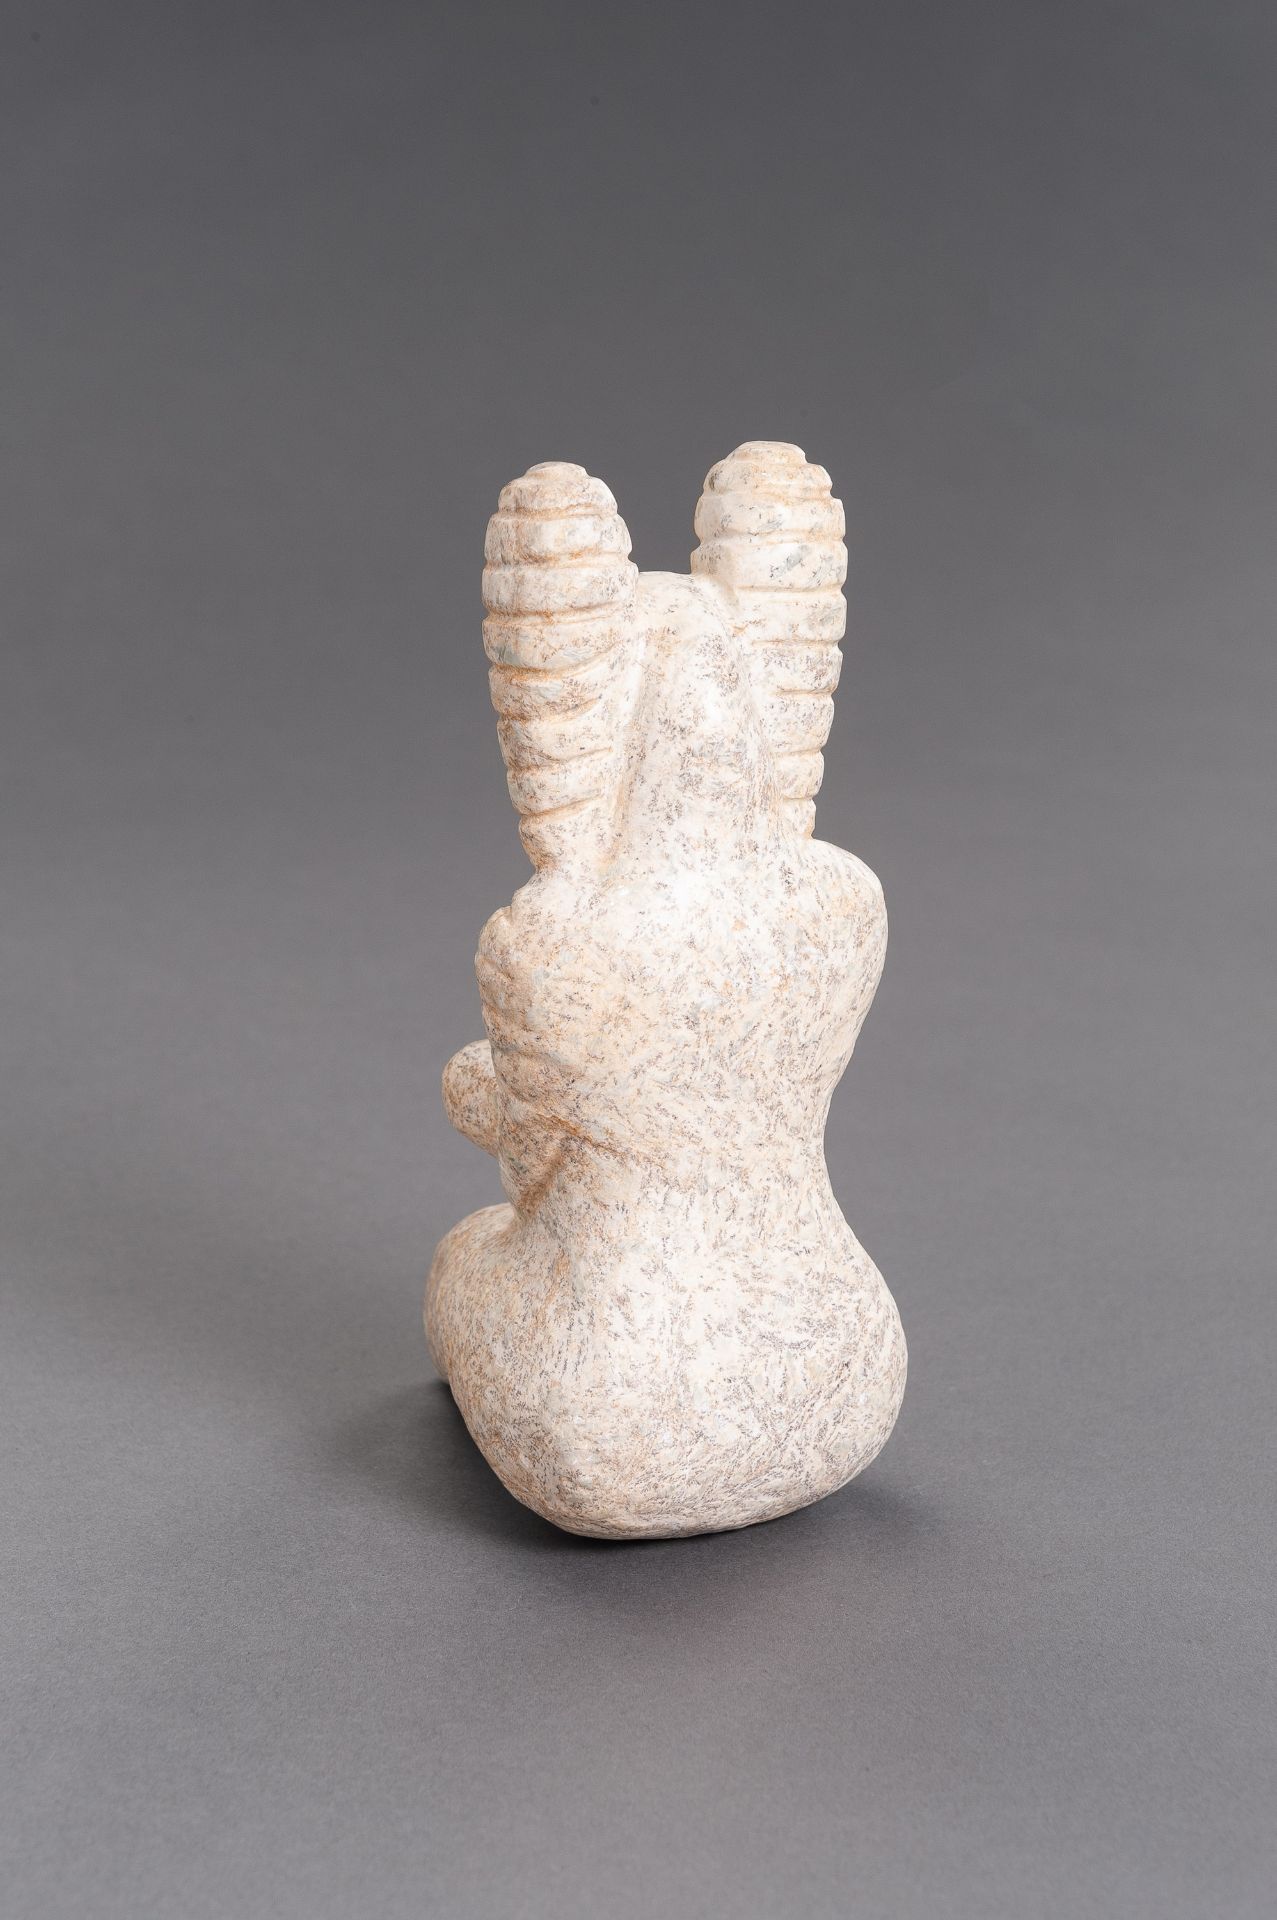 A STONE INDUS VALLEY STYLE FIGURE OF A FERTILITY GODDESS - Image 6 of 9